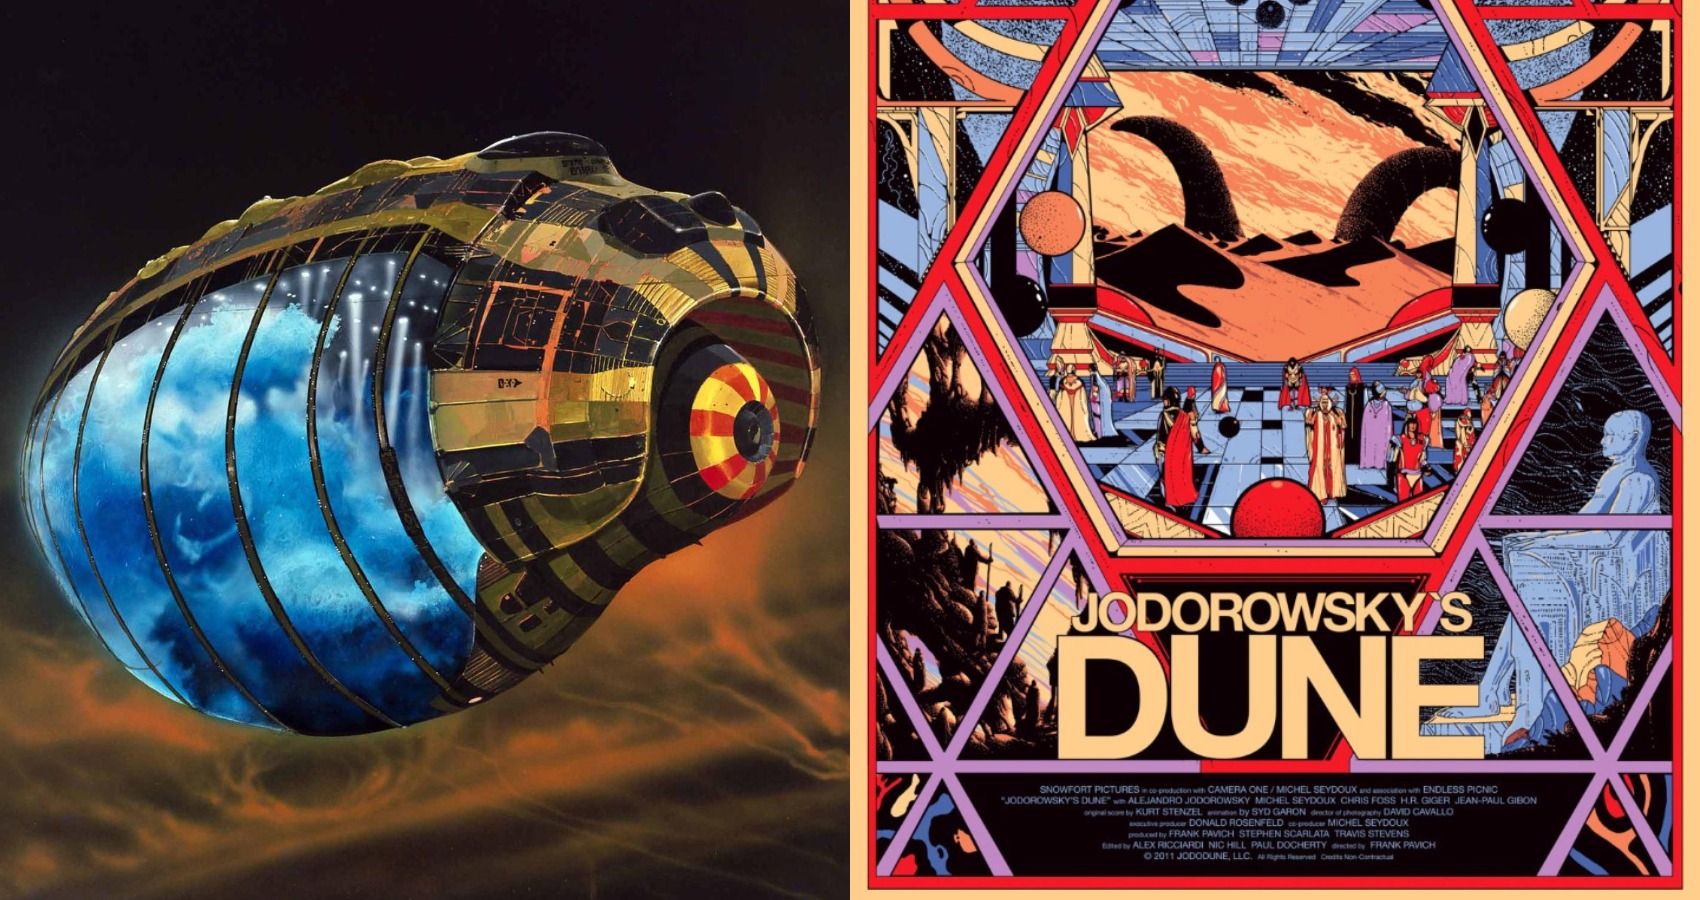 Split image of concept art and movie poster of Jodorowsky's Dune